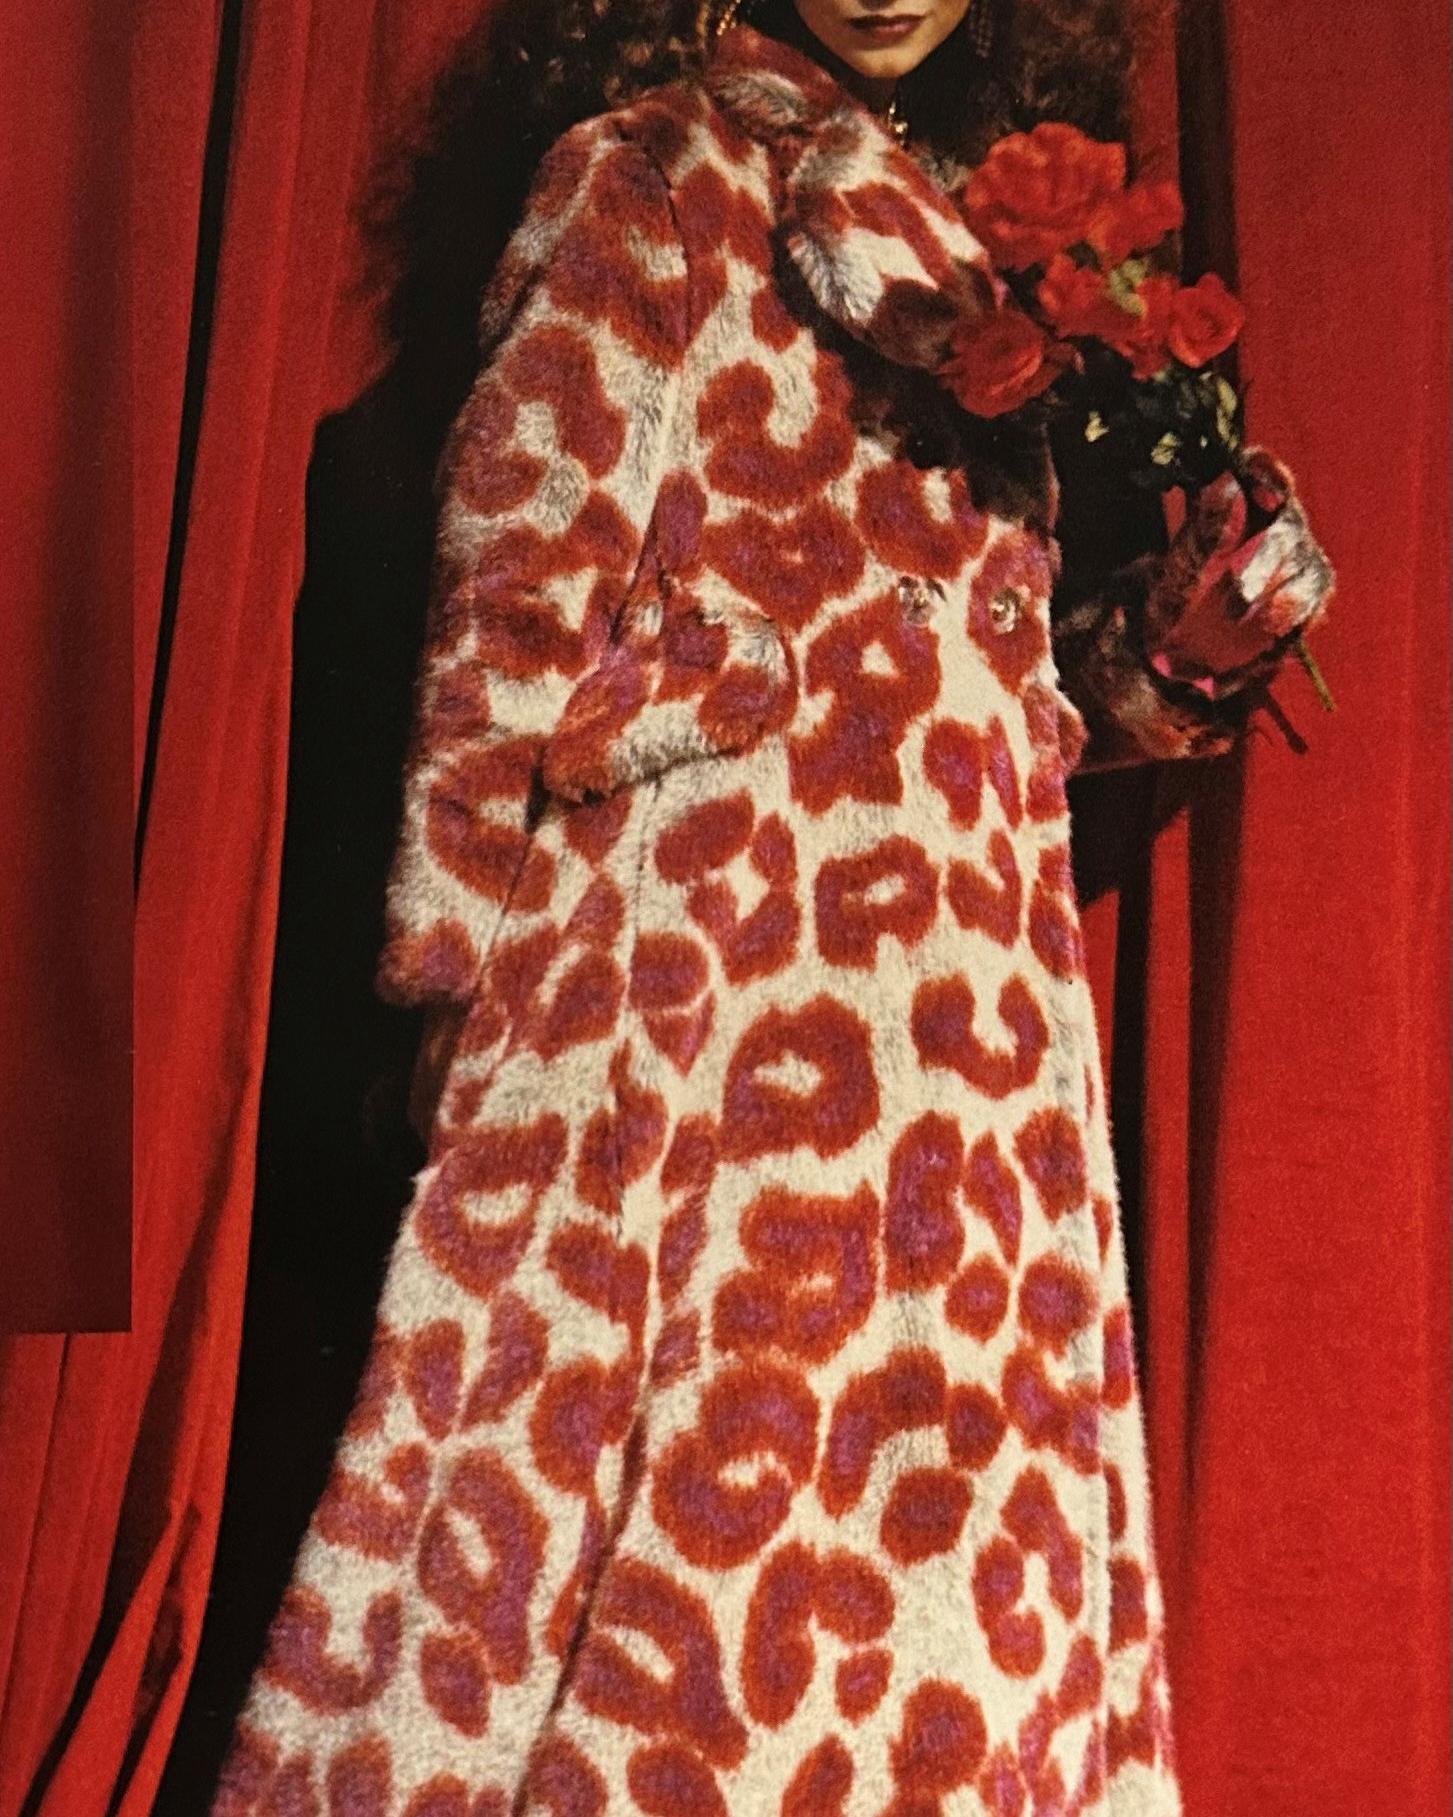 A/W 1992 Vivienne Westwood 'Always on Camera' Collection faux fur red and beige leopard print coat and glove set. Midi length long sleeve faux fur double-breasted coat with large lapels and pockets at hips pairs with matching faux fur gloves. Clear